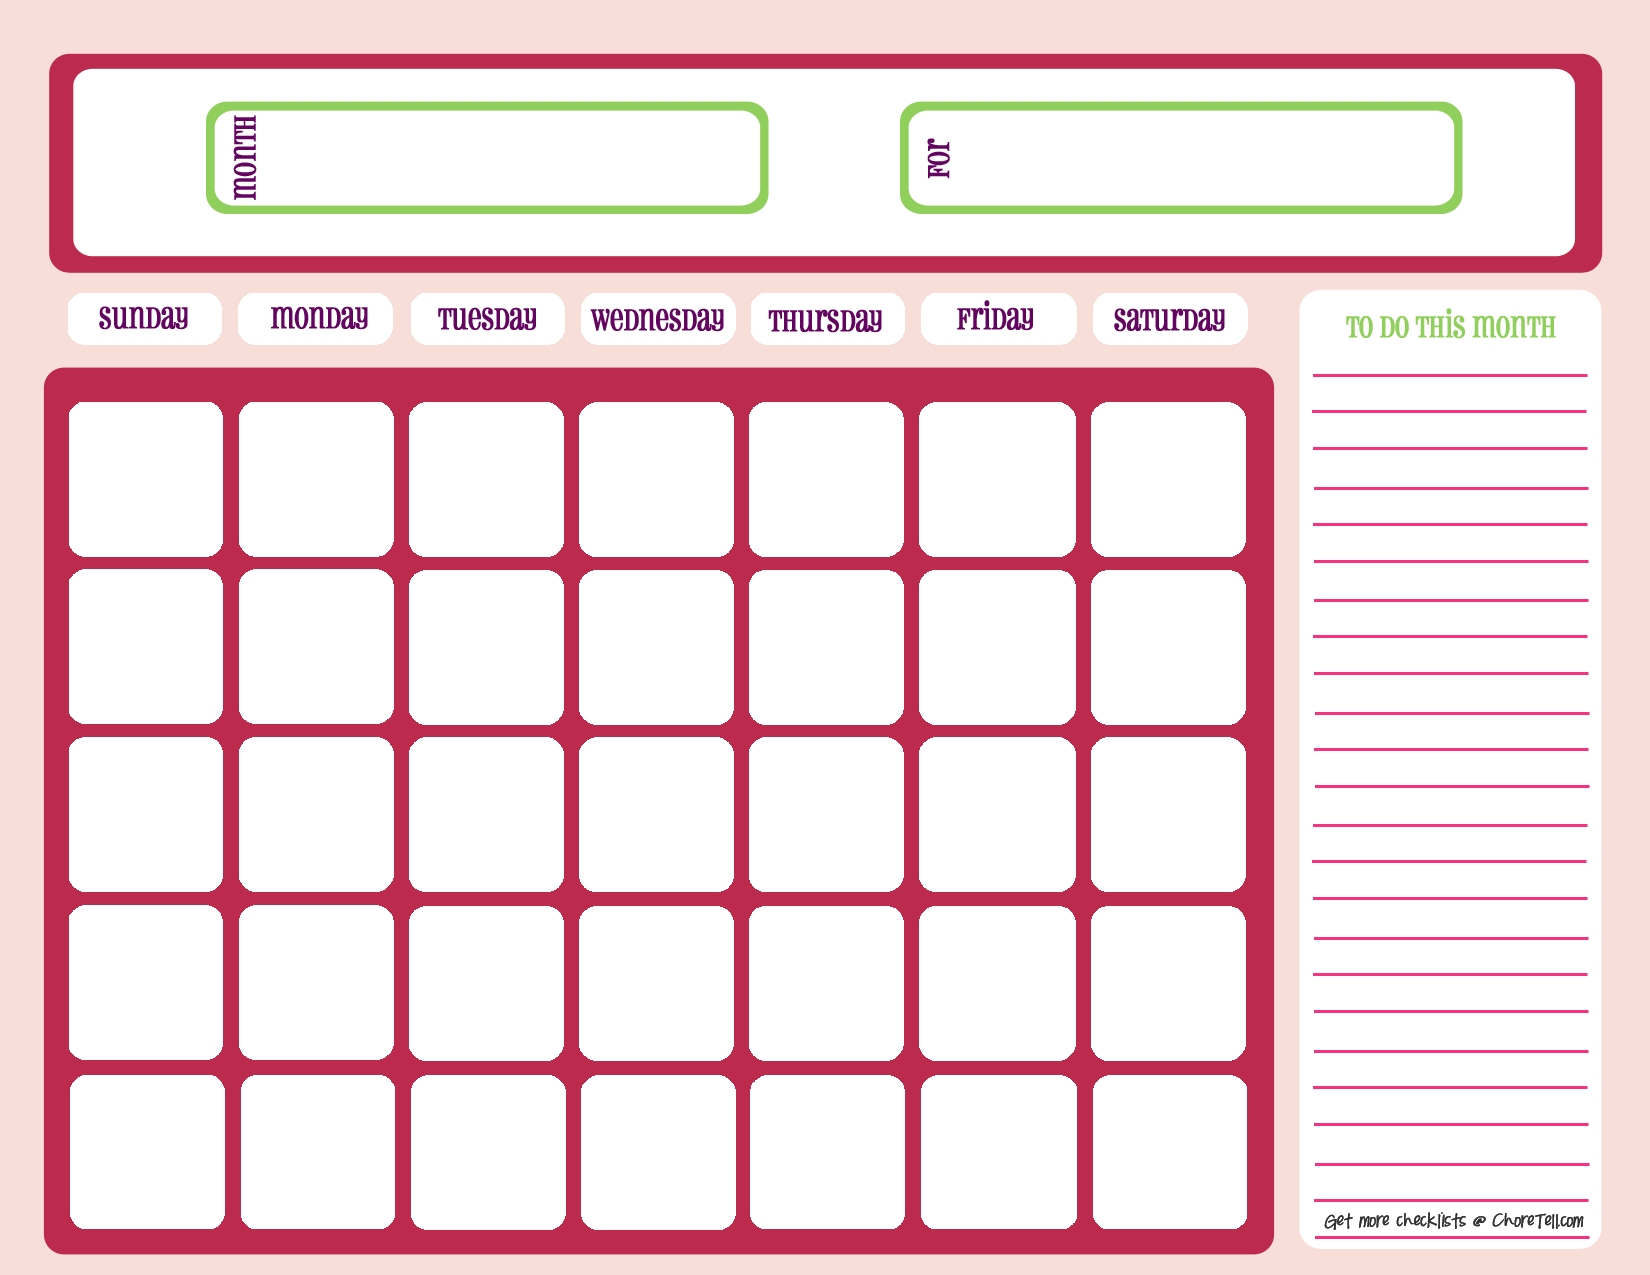 17 Blank Monthly Calendar Template Images - Printable Blank